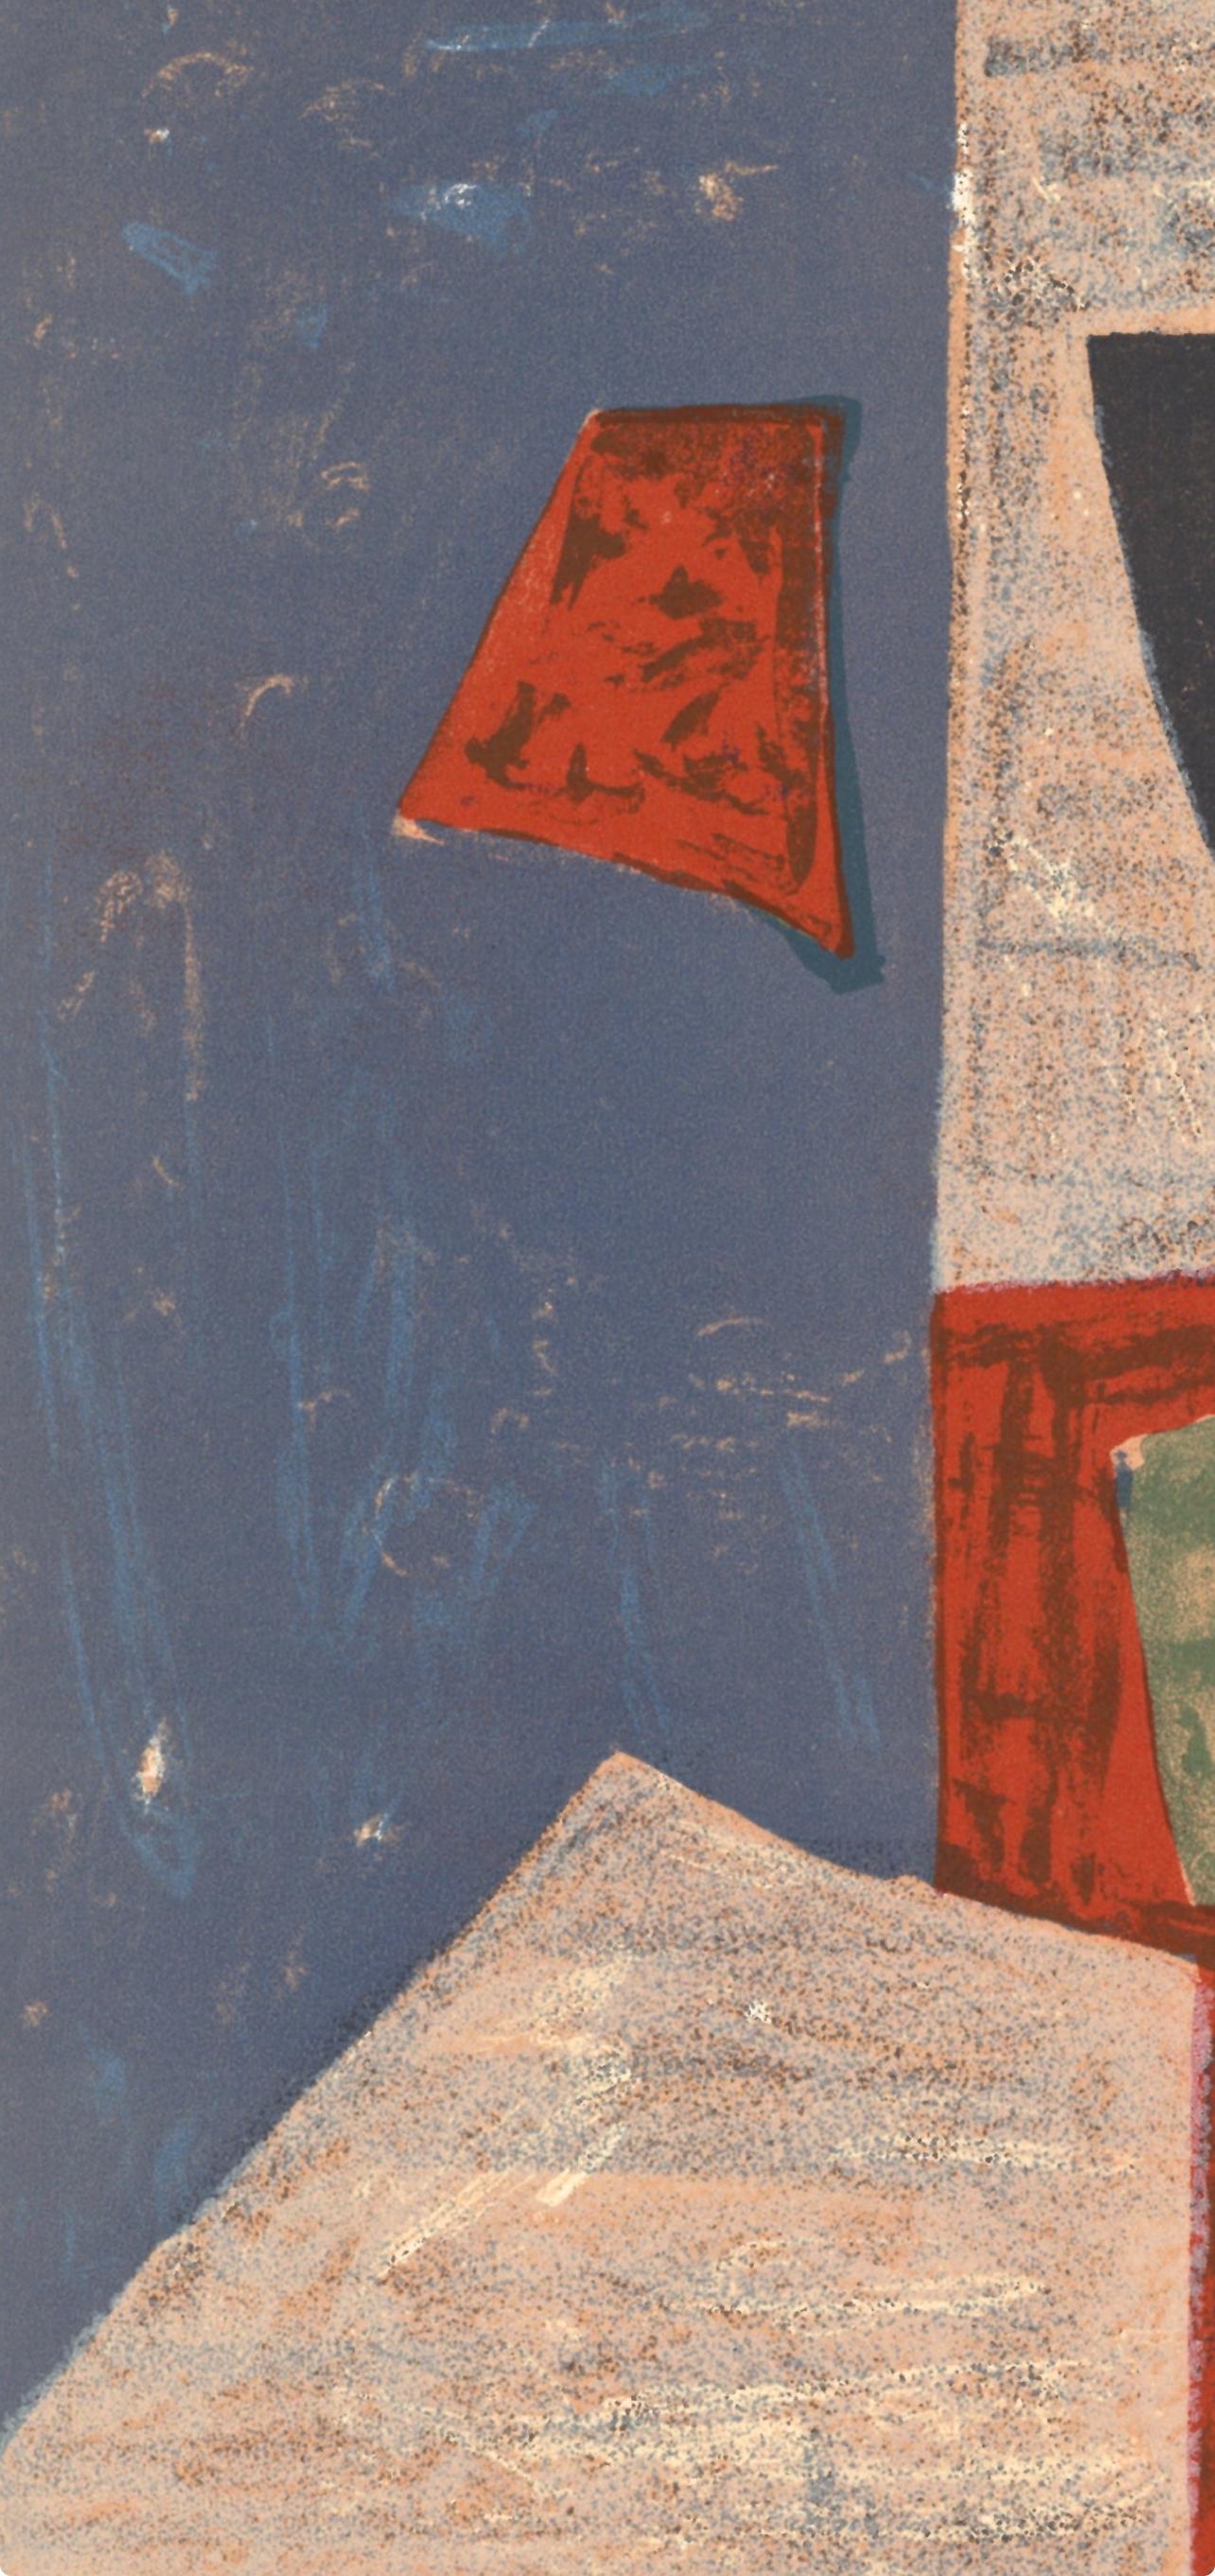 Poliakoff, Composition rose, rouge (Poliakoff/Schneider 17), XXe Siècle (after) - Modern Print by Serge Poliakoff